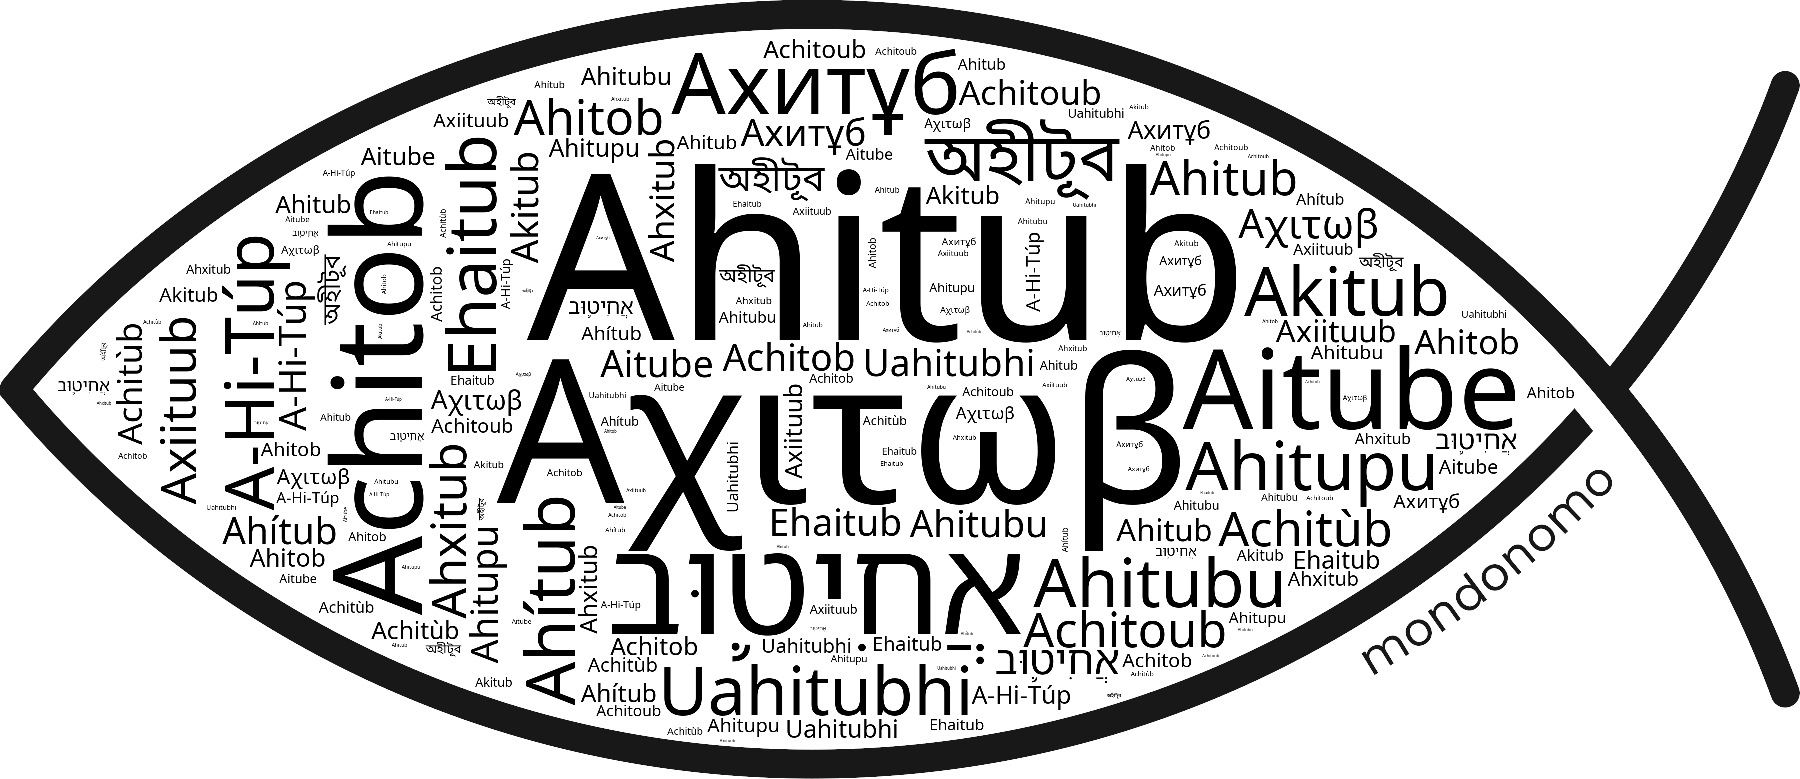 Name Ahitub in the world's Bibles